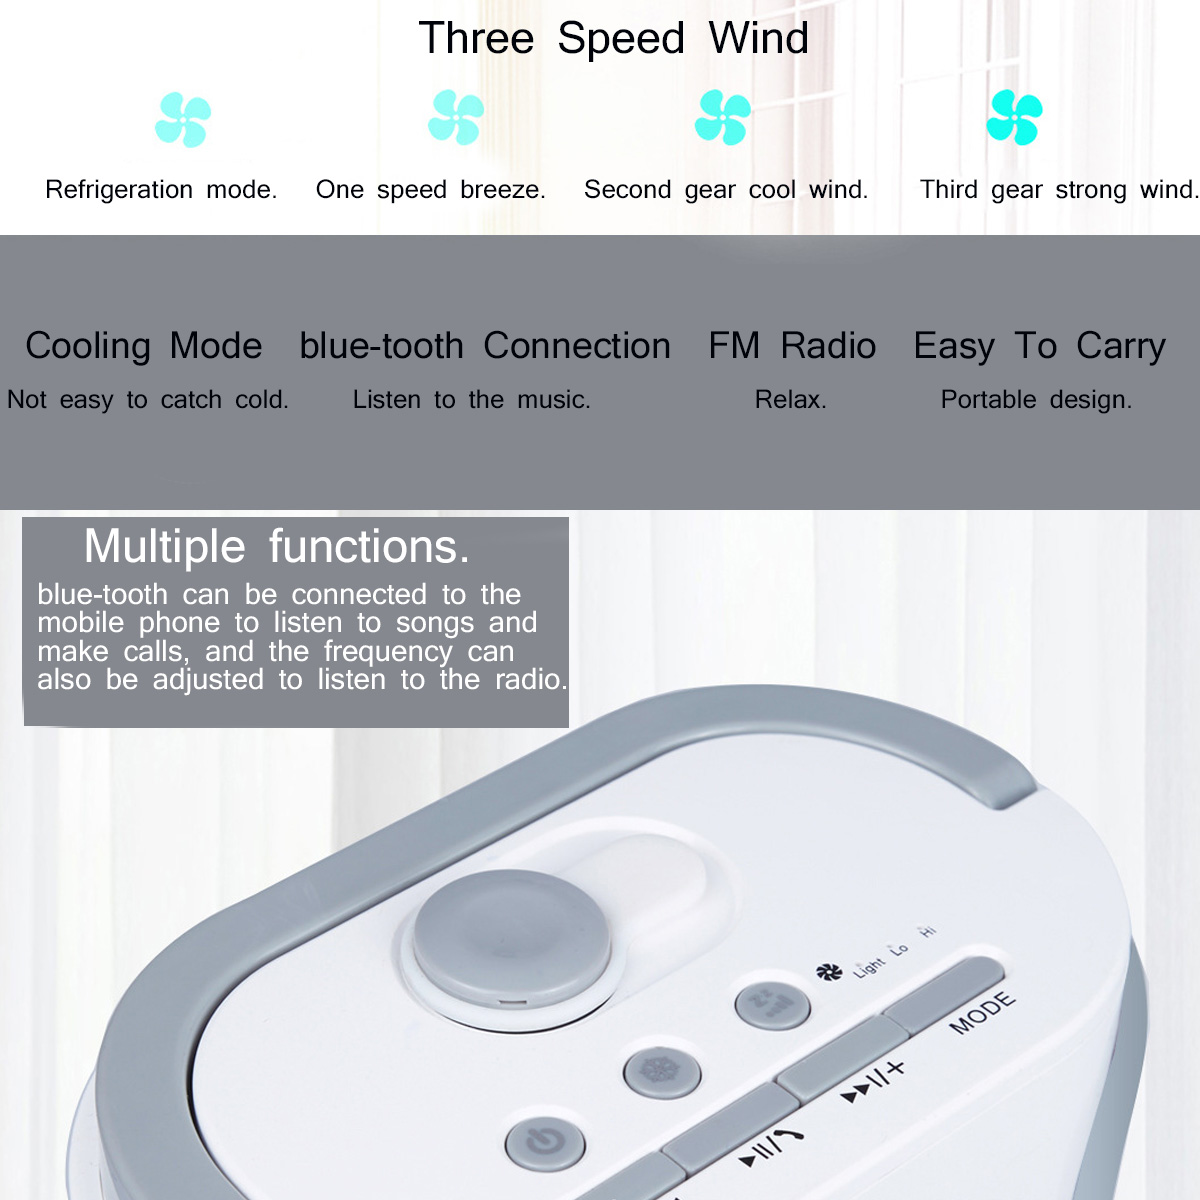 USB-Multifunction-Humidifier-Portable-Air-Conditioner-Fan-Cooling-bluetooth-Speaker-Gifts-for-Family-1675300-4